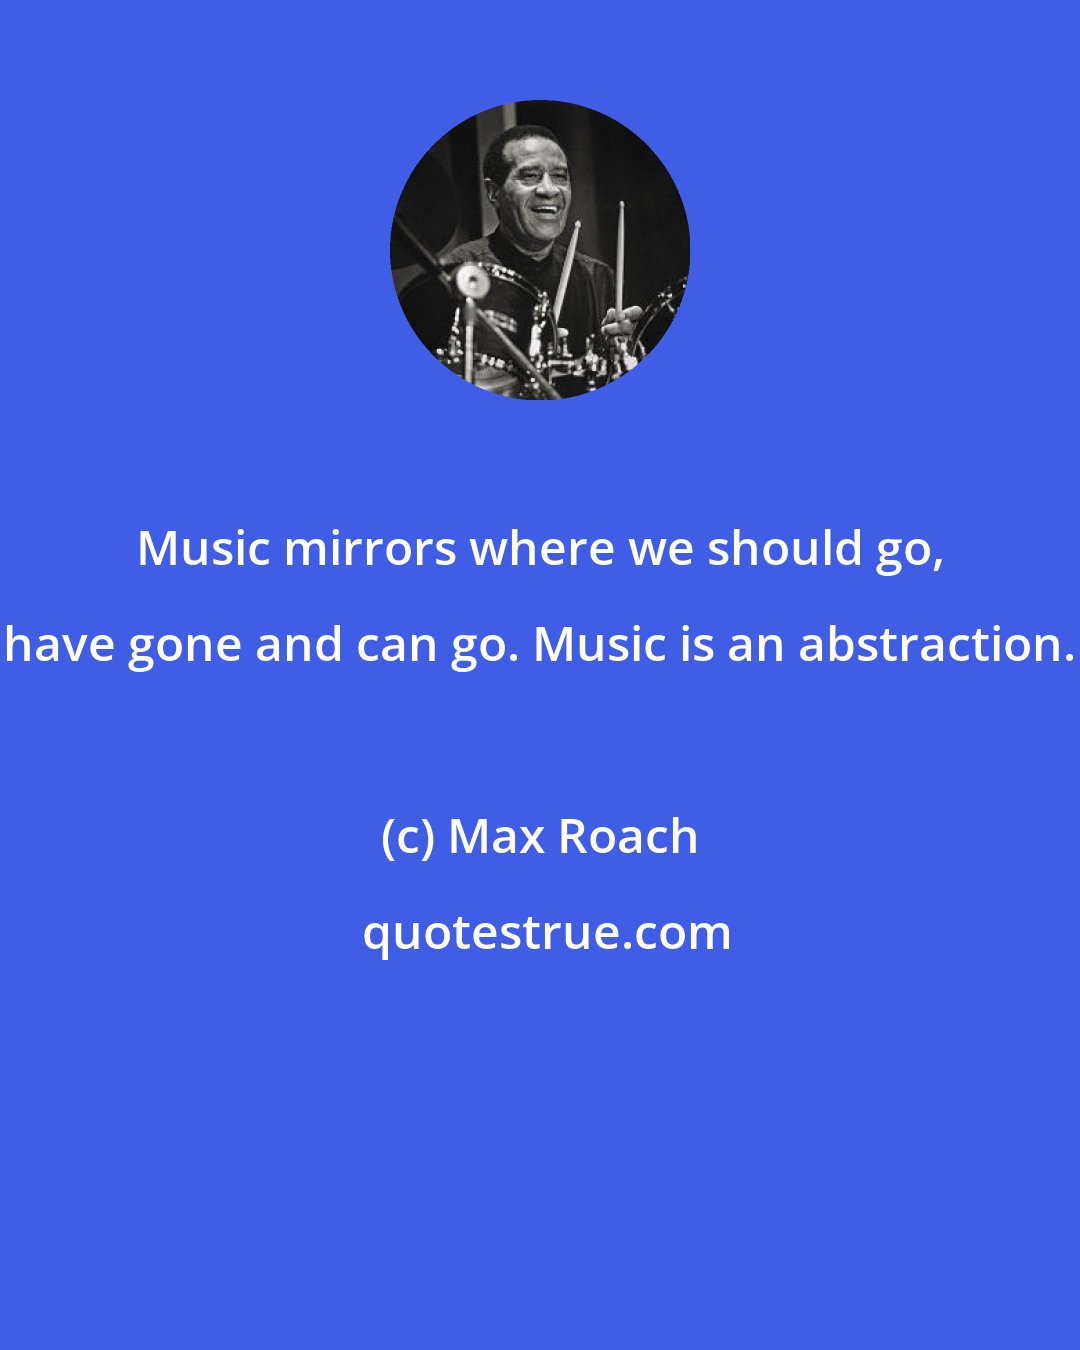 Max Roach: Music mirrors where we should go, have gone and can go. Music is an abstraction.